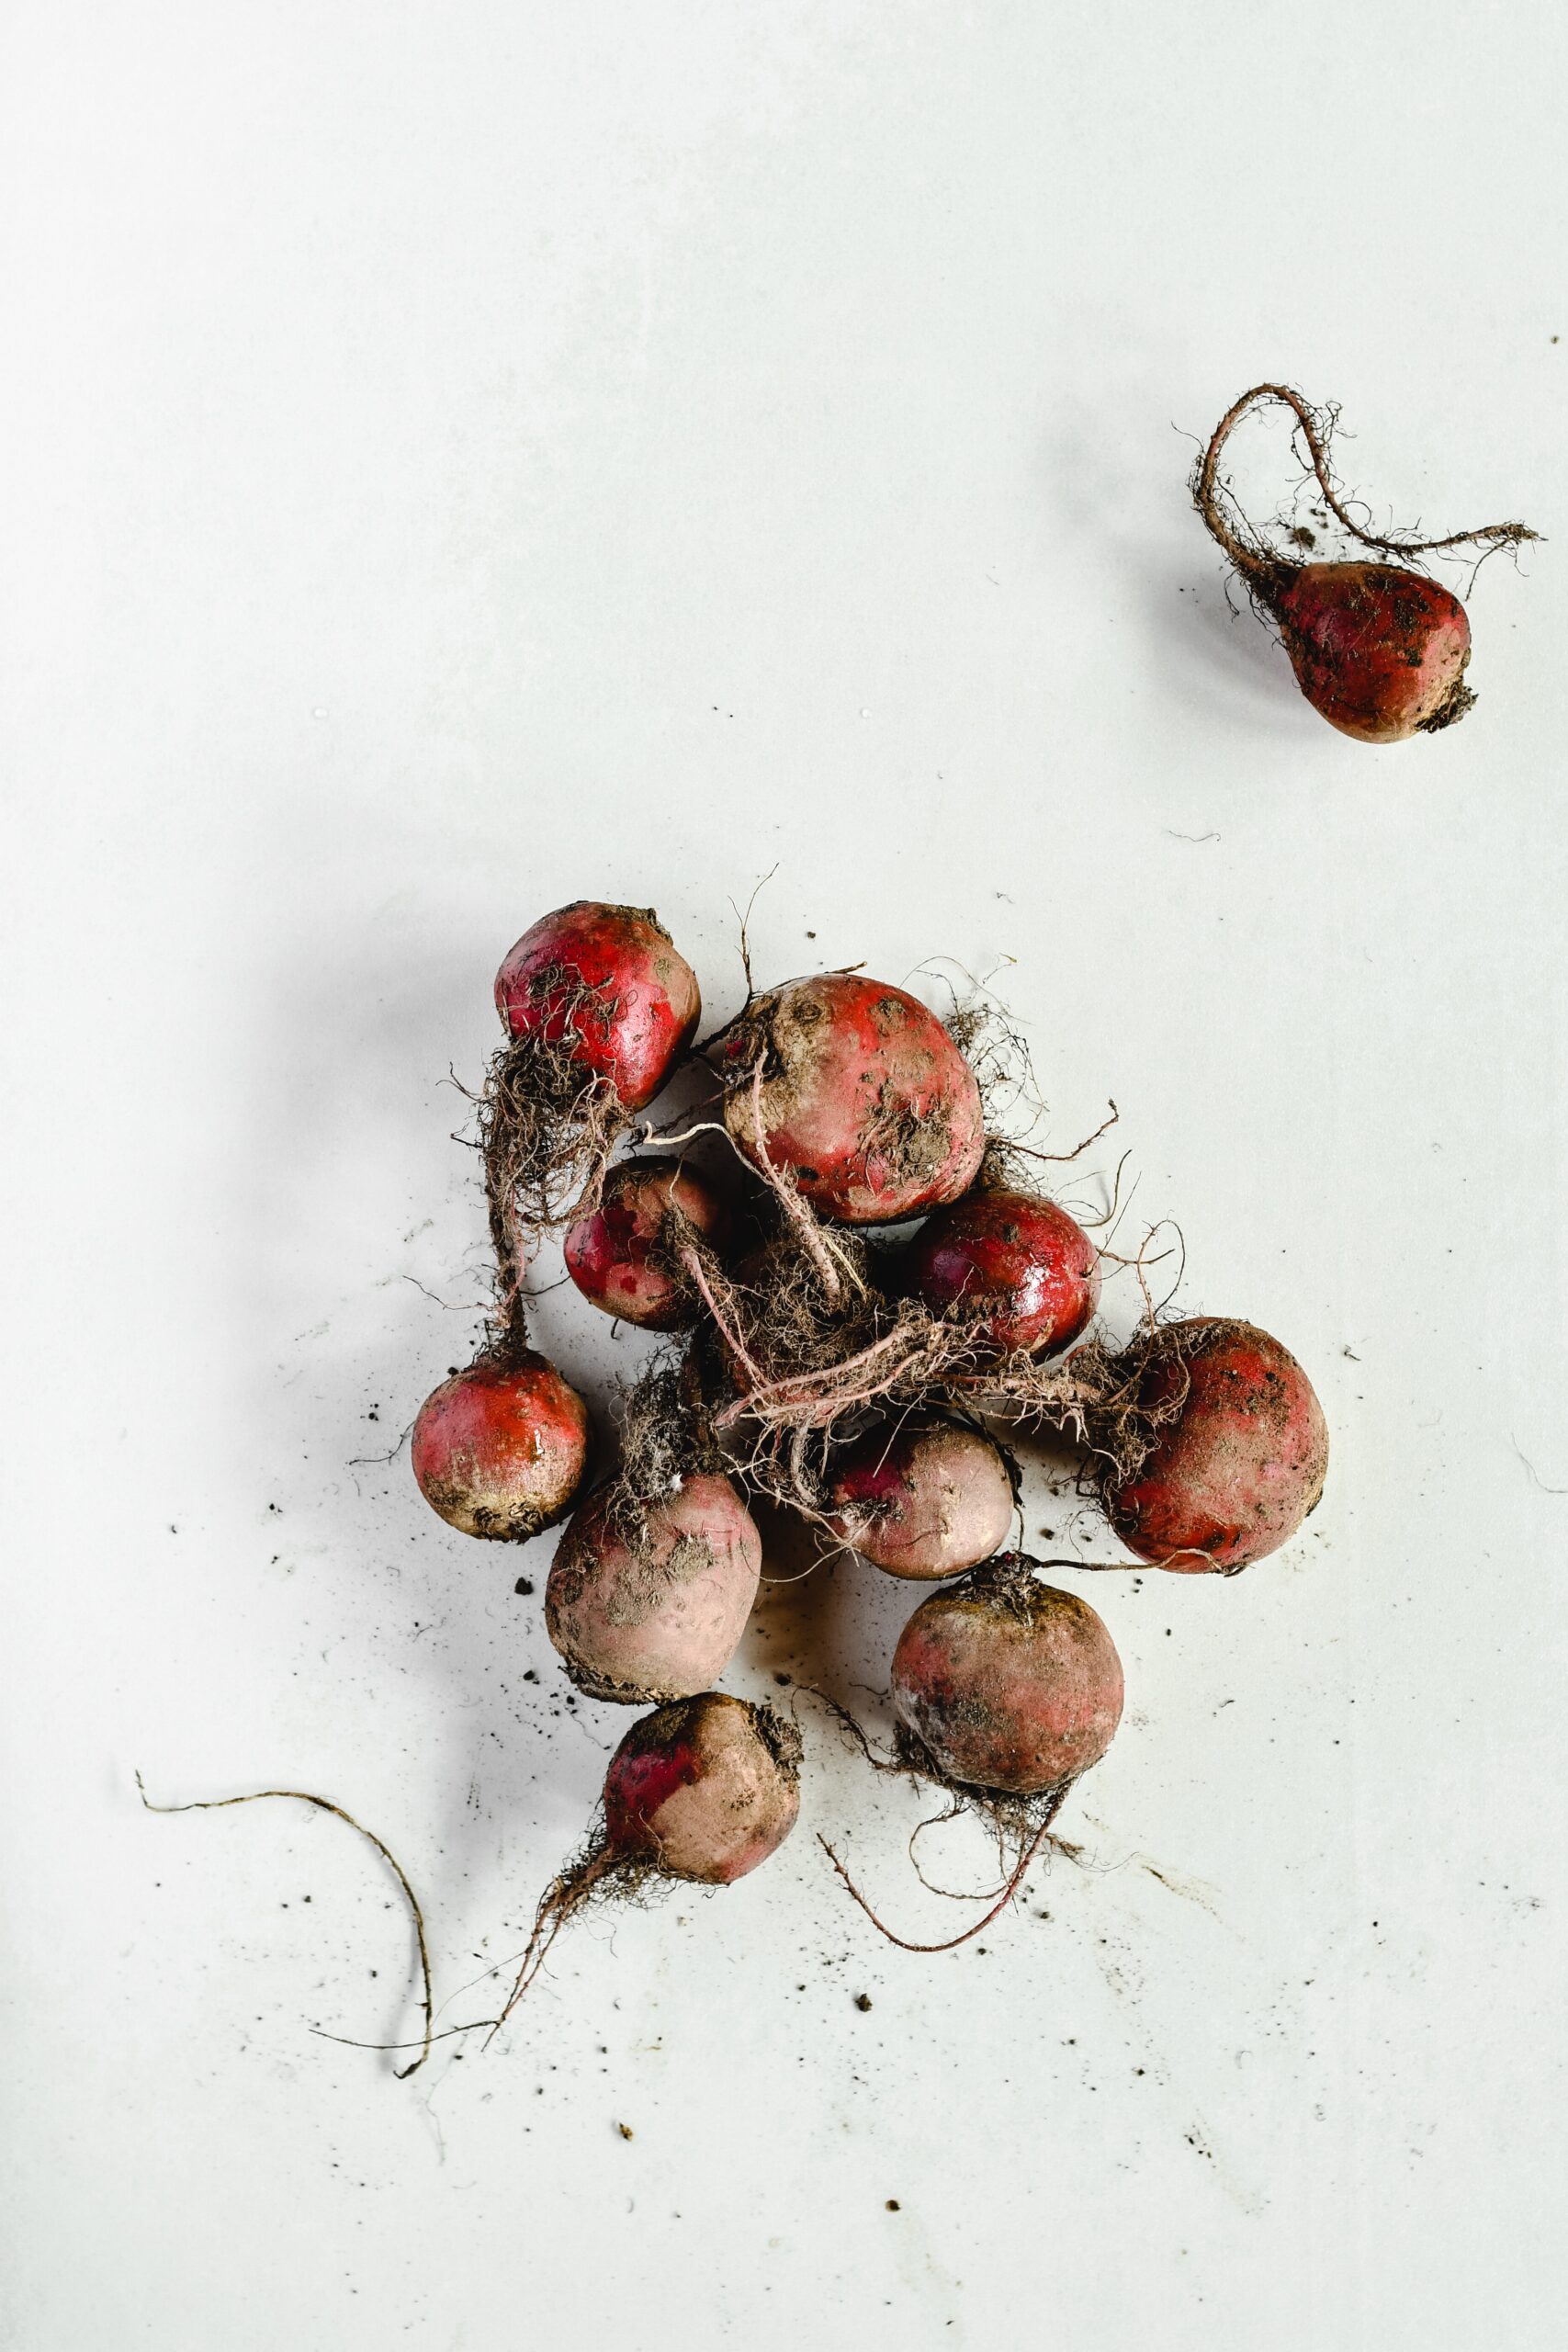 Winter produce food storage - beets - root vegetables - beets on white table